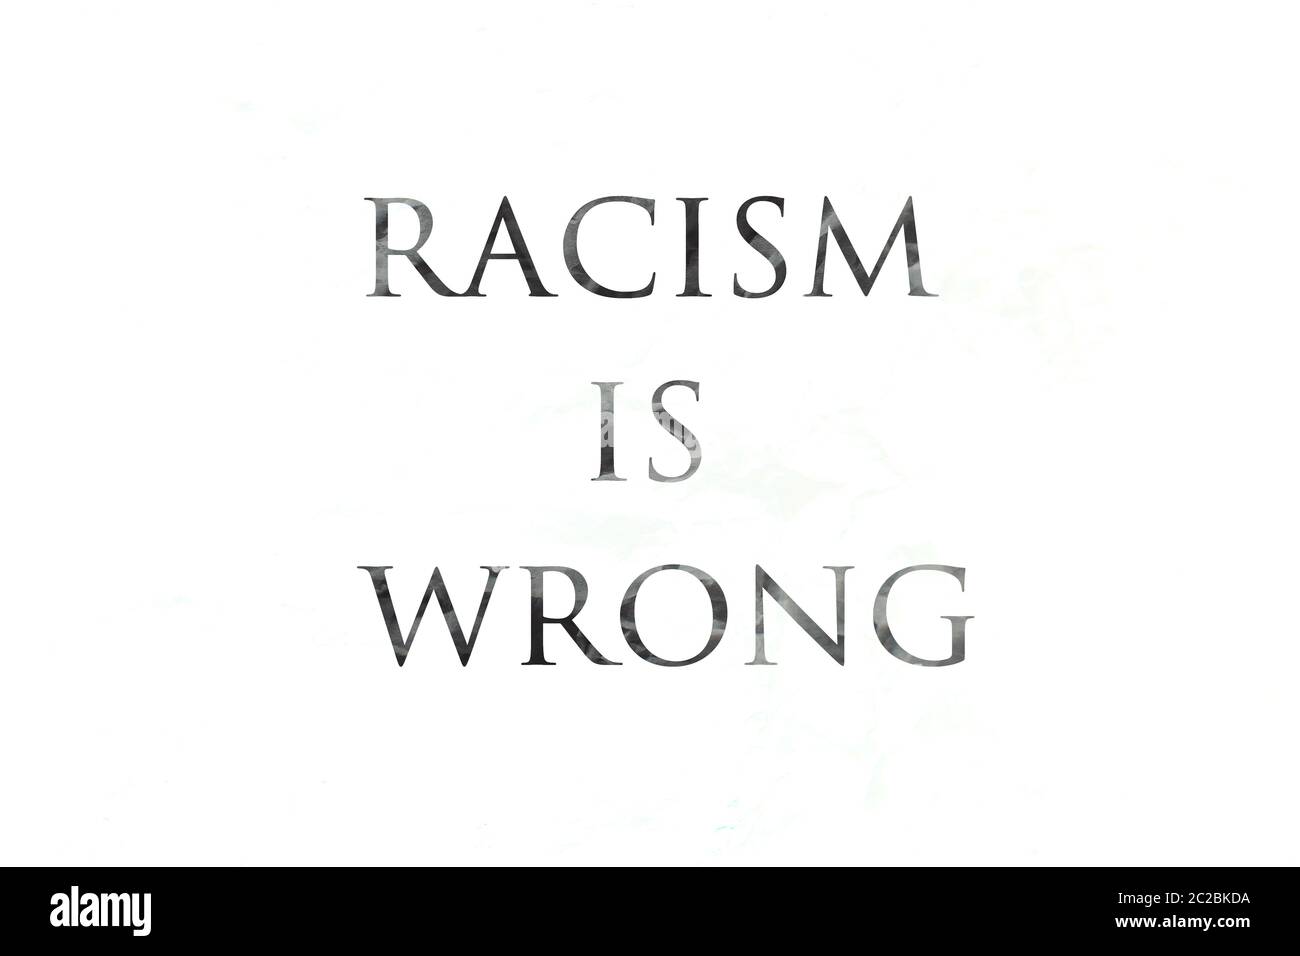 Stop Racism. Poster with phrase Racism Is Wrong, banner on black background. Stock Photo